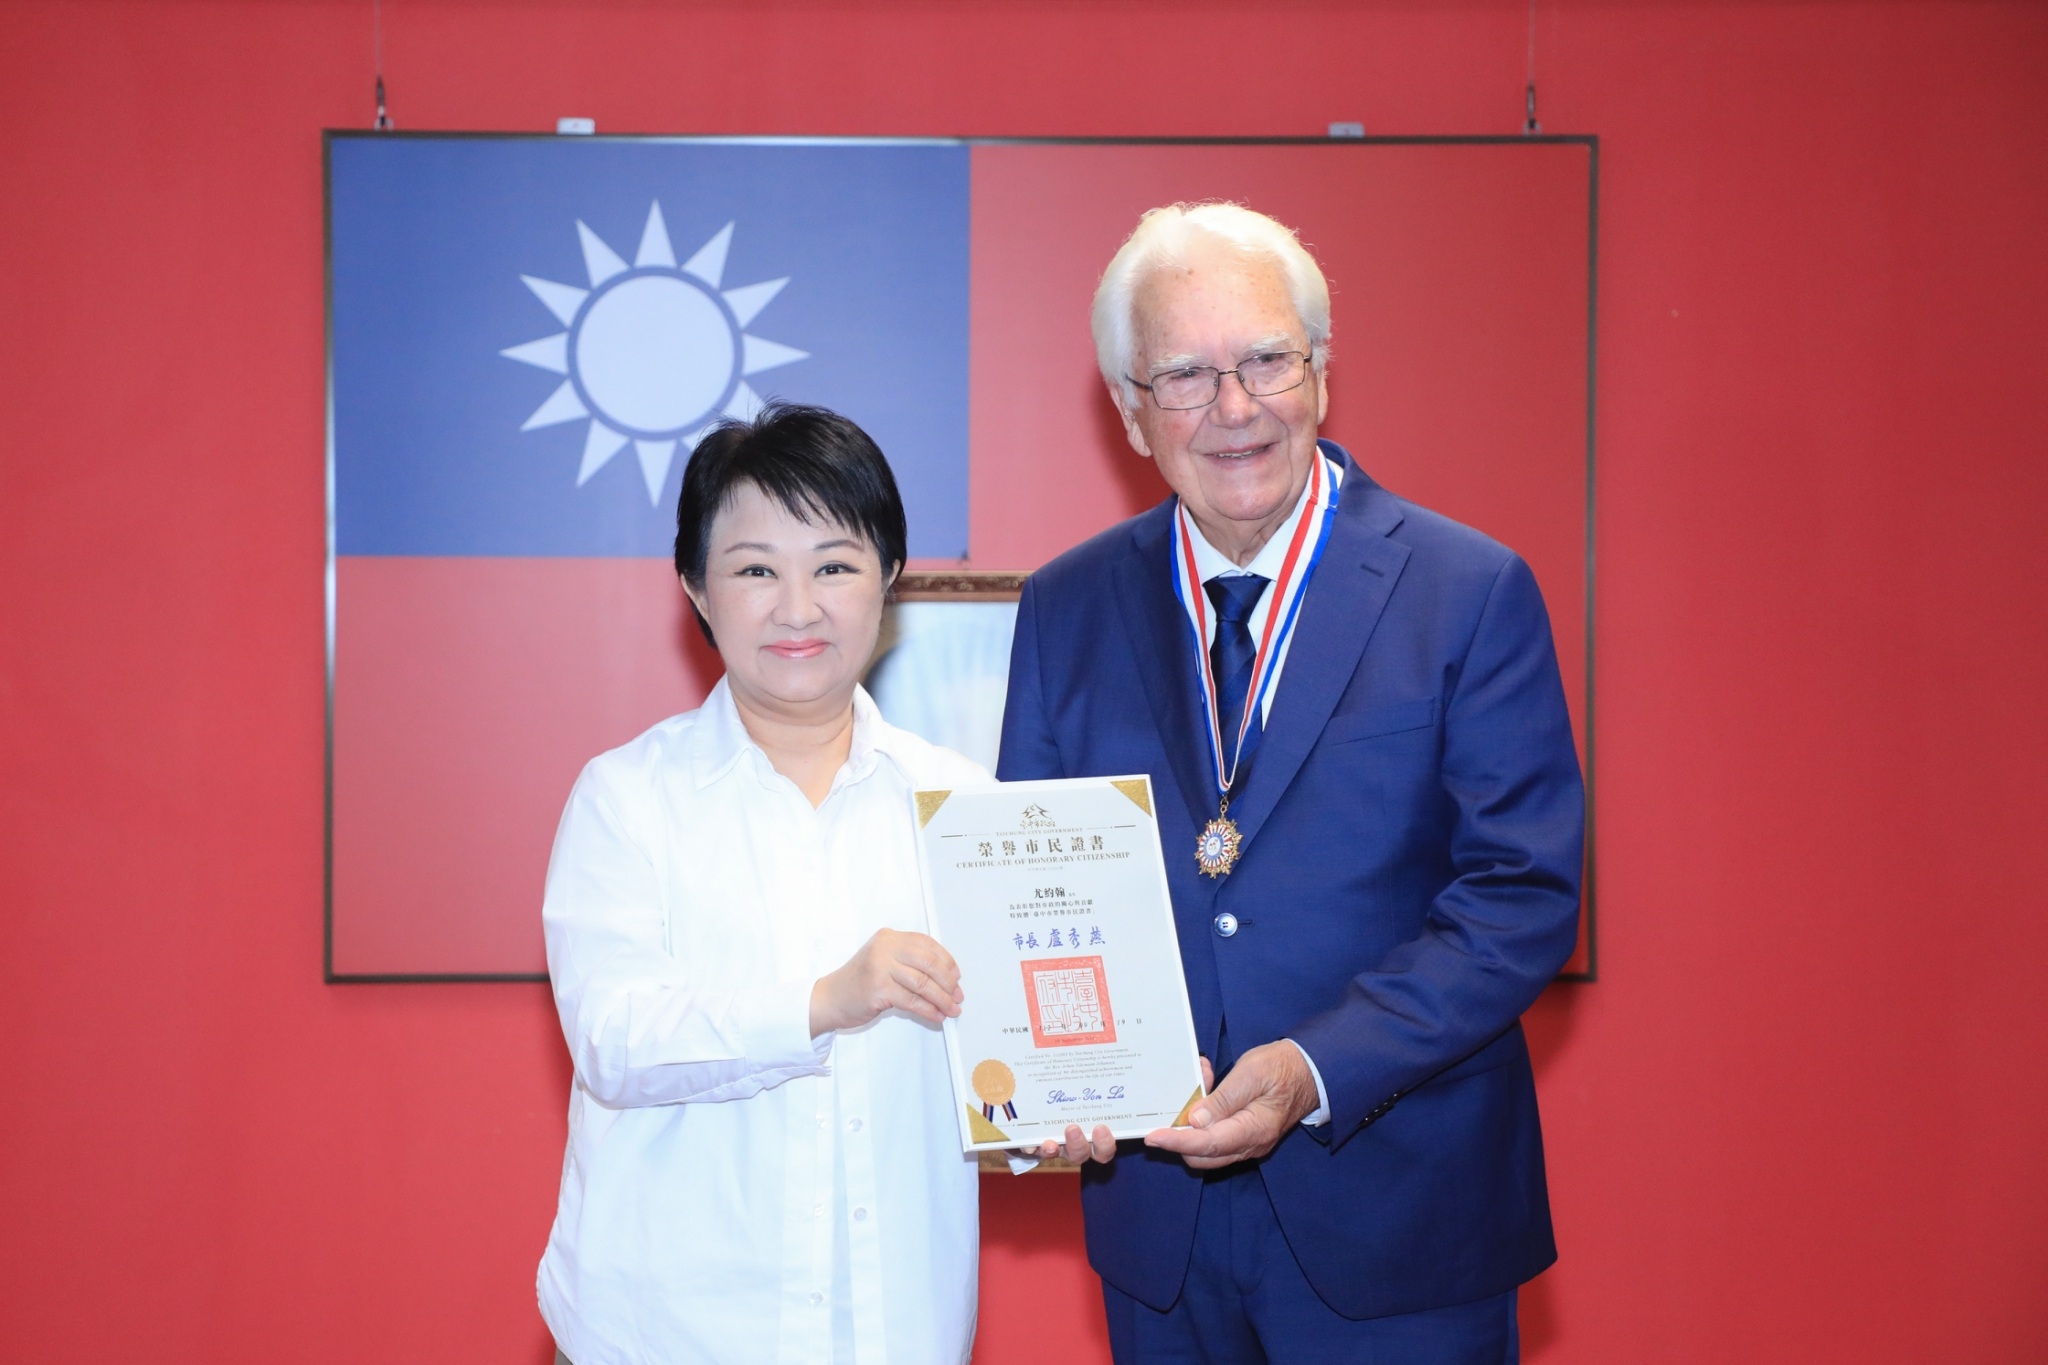 Pastor Johan Tidemann Johansen received the title of Honorary Citizen from the Taichung Mayor (盧秀燕).  Photo provided by the Council for Hakka Affairs of the Taichung City Government